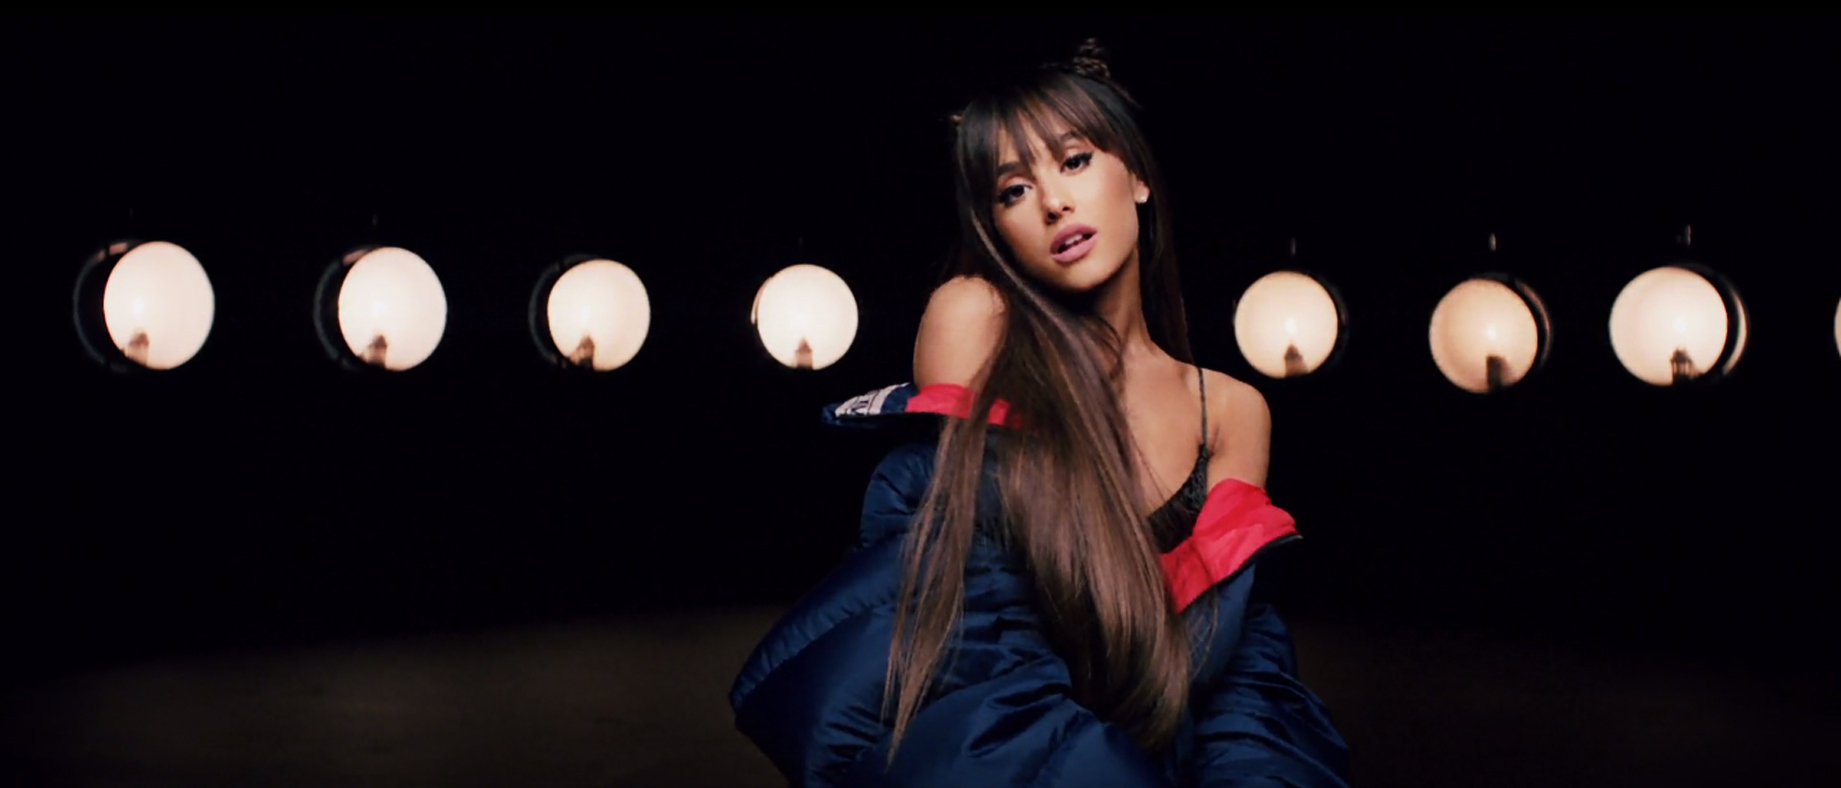 Watch Ariana Grande's Bubbly New Lyric Video for 'Everyday'